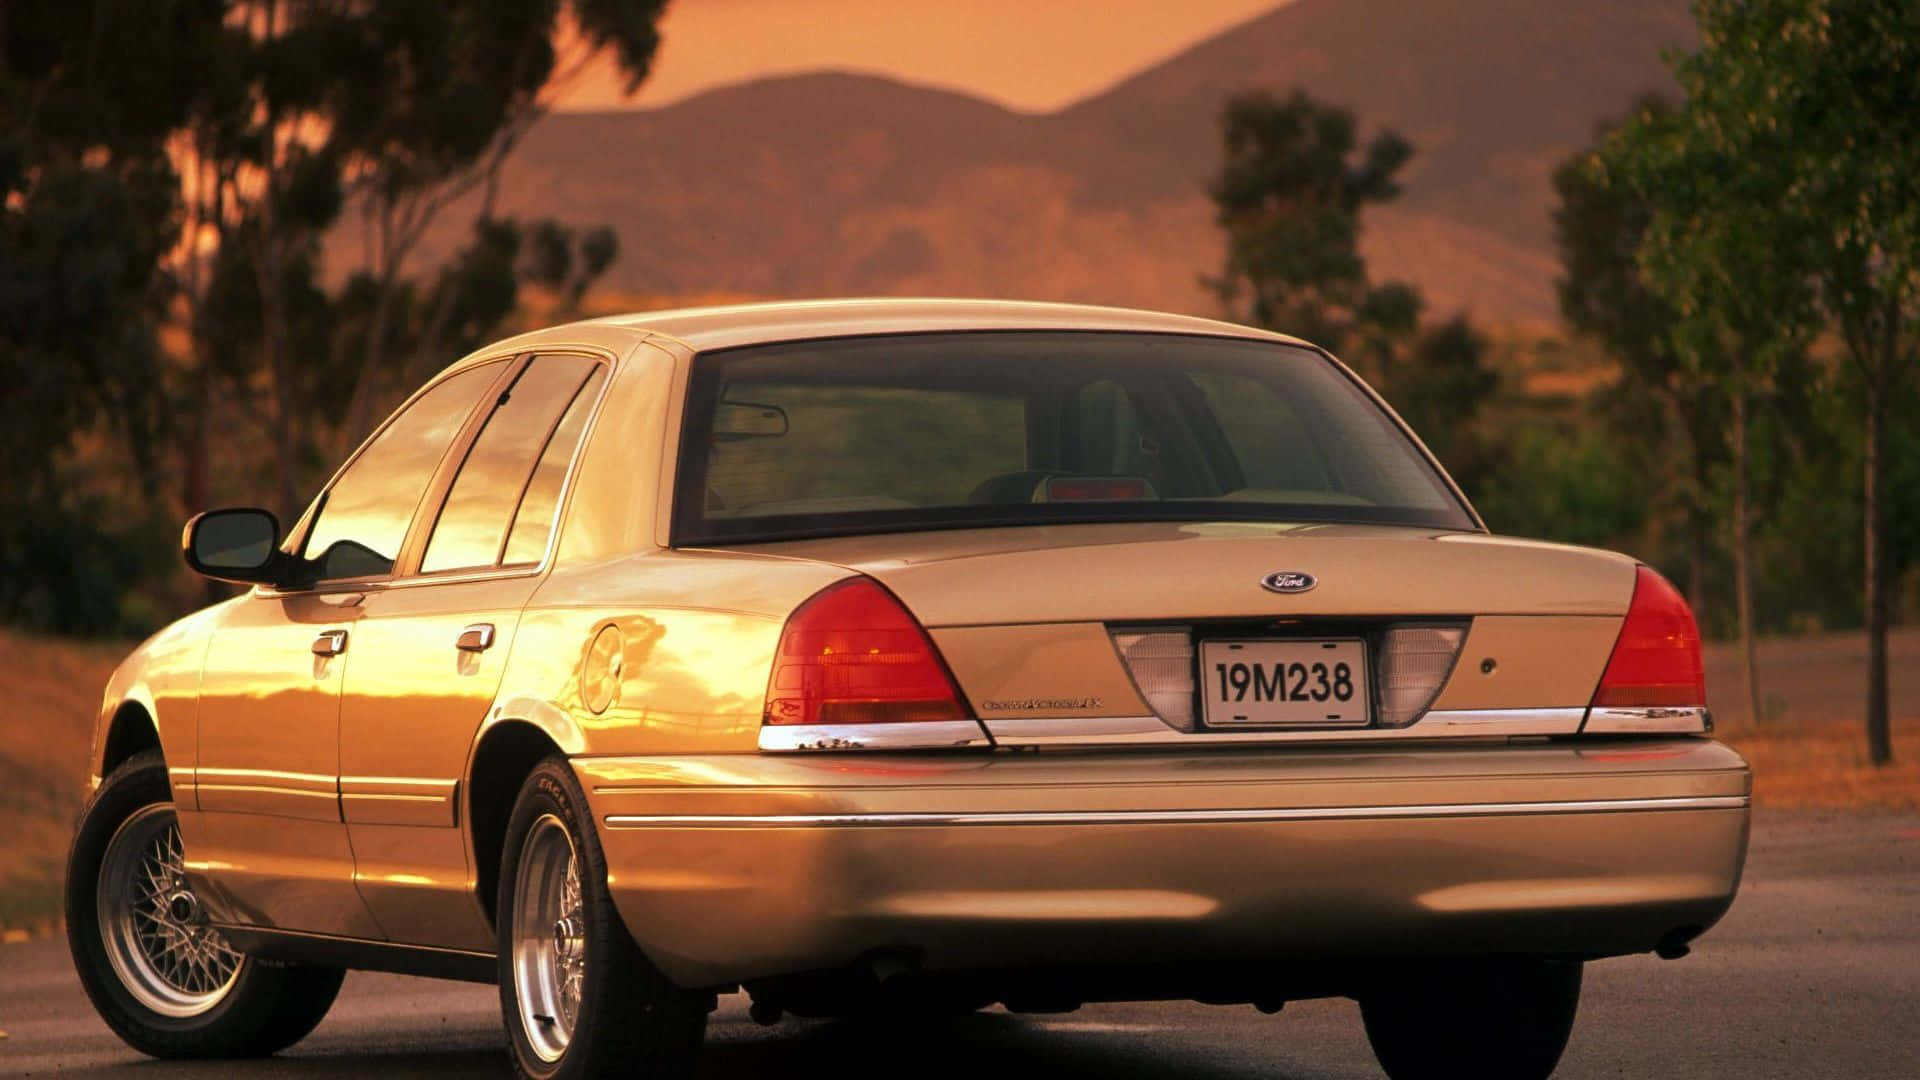 Classic Ford Crown Victoria on the road Wallpaper